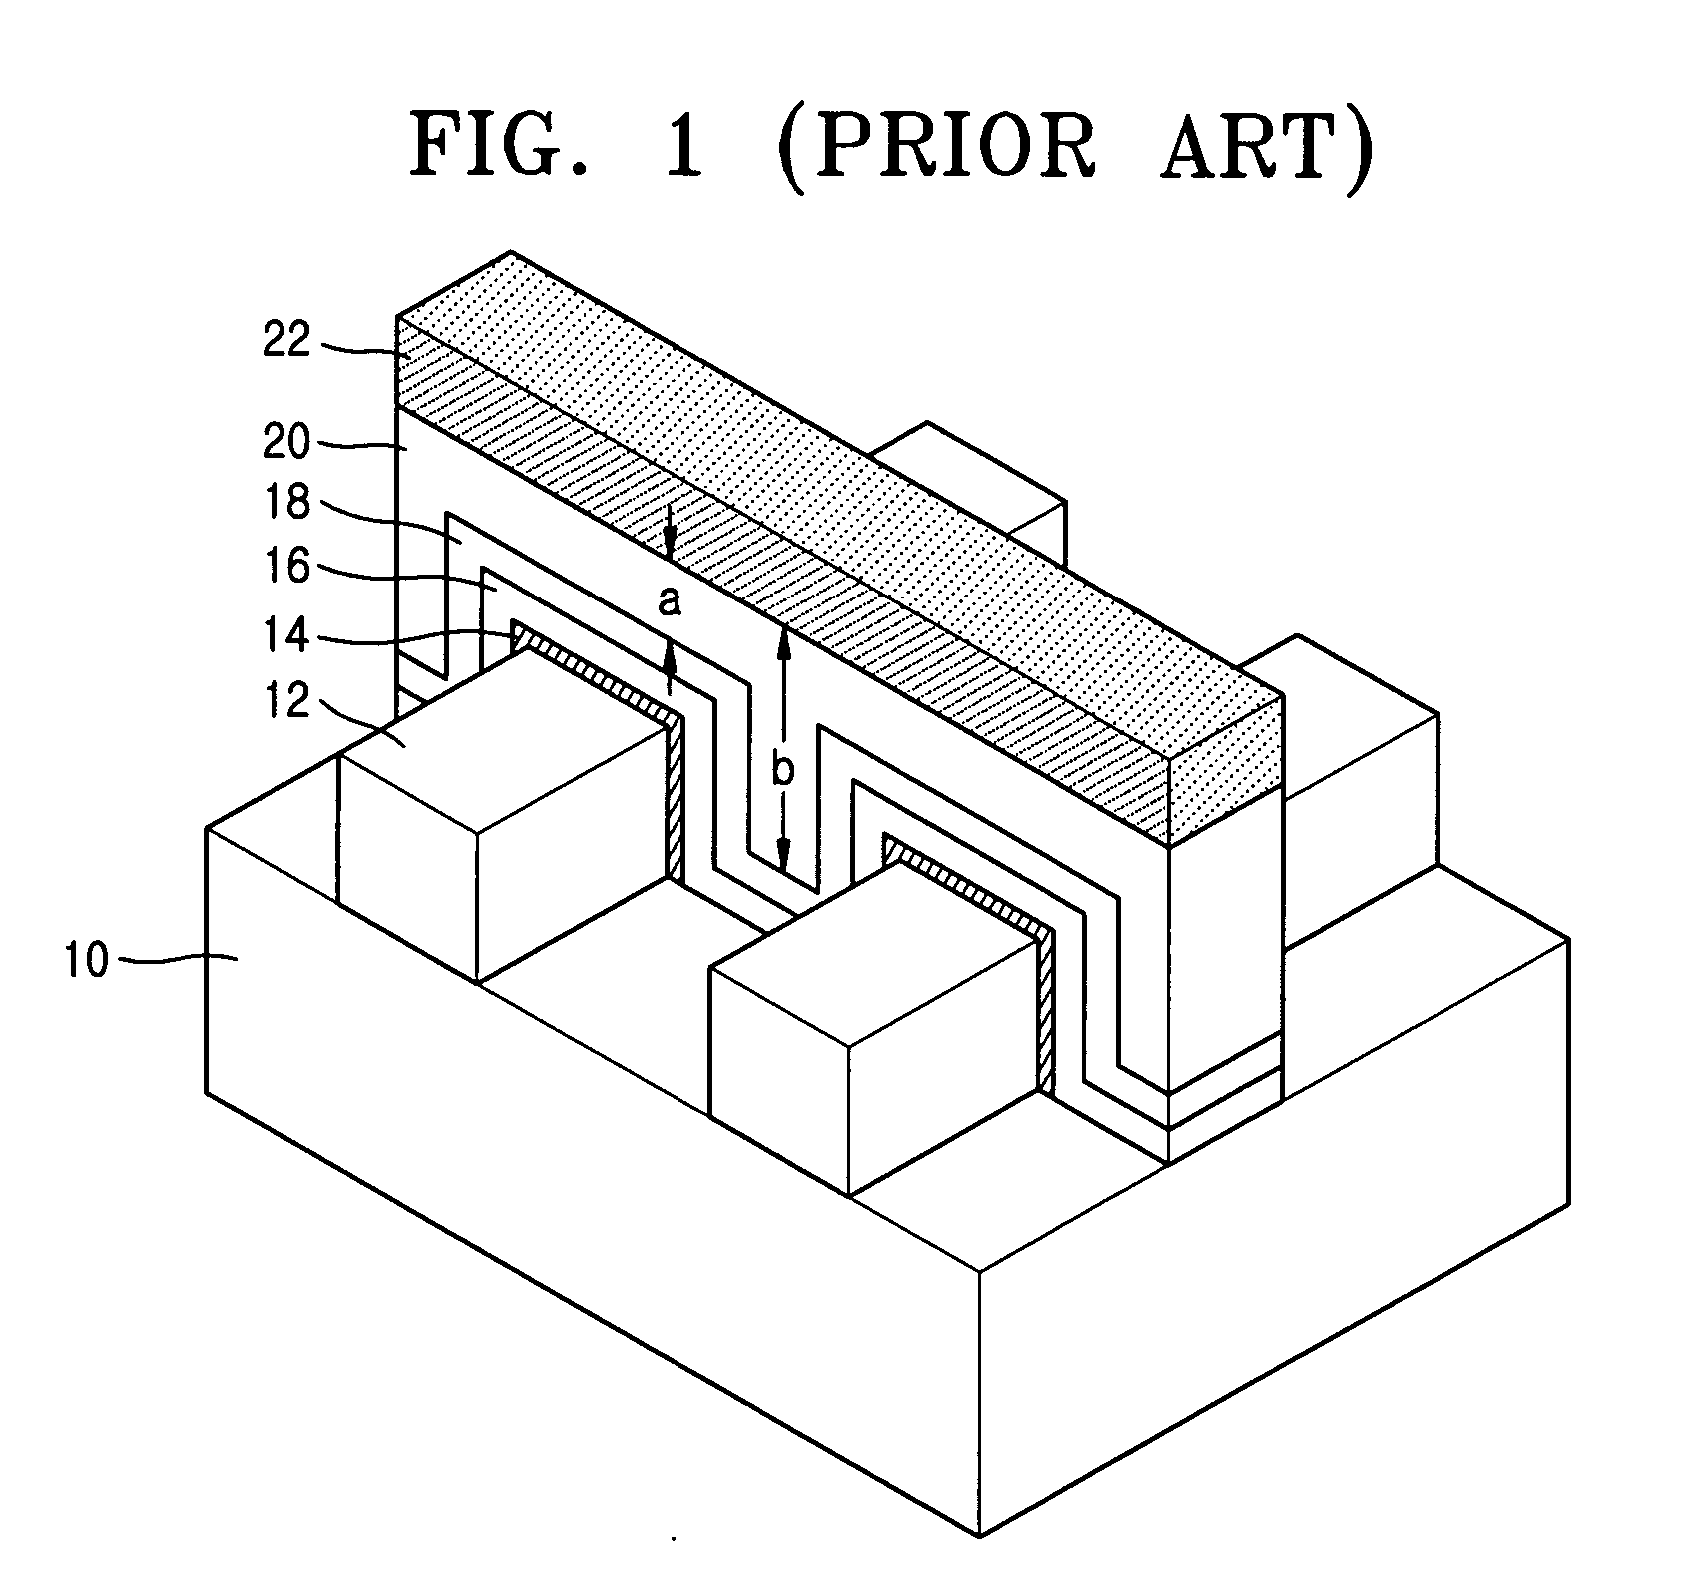 Metal oxide semiconductor (MOS) transistor including a planarized material layer and method of fabricating the same